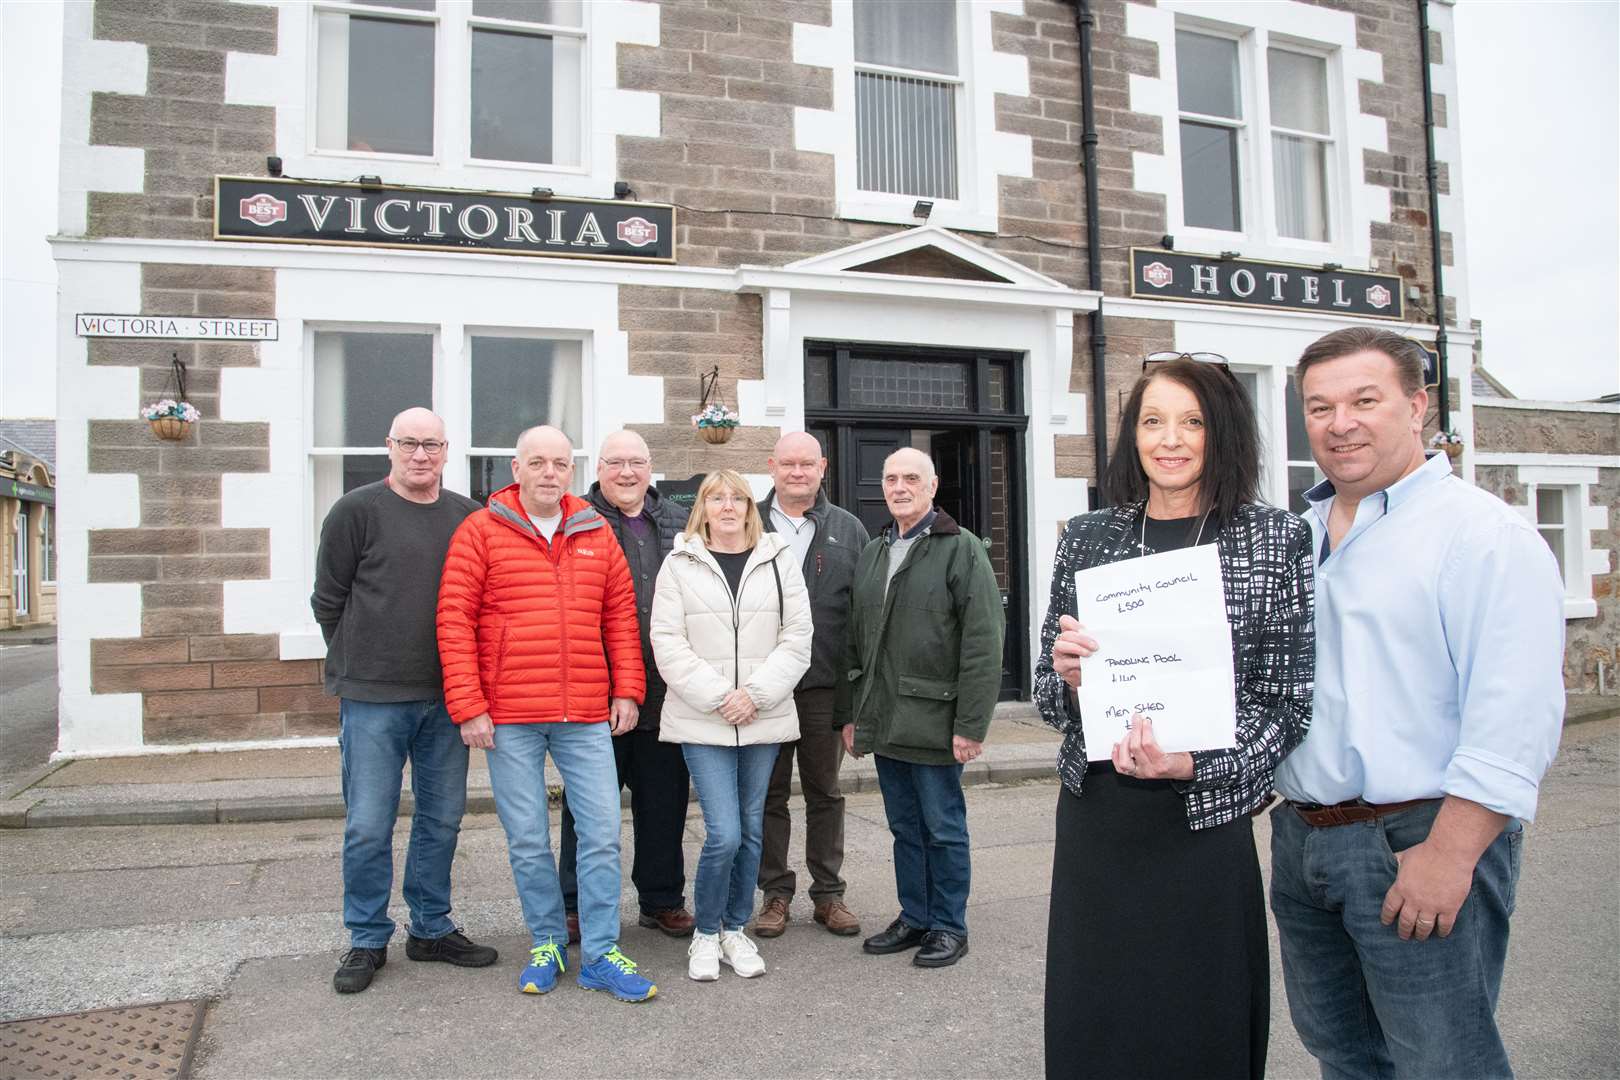 Victoria Hotel owners Lorraine and David Boa hand over donations to (back, from left) John Begg, Allan Gargan, Jimmy Bremner (all Finechty Men's Shed), Lil Urquhart (Portknockie Paddling Pool Committee), Andy Richards (Finechty Men's Shed) and PCA chairman John Going. Picture: Daniel Forsyth